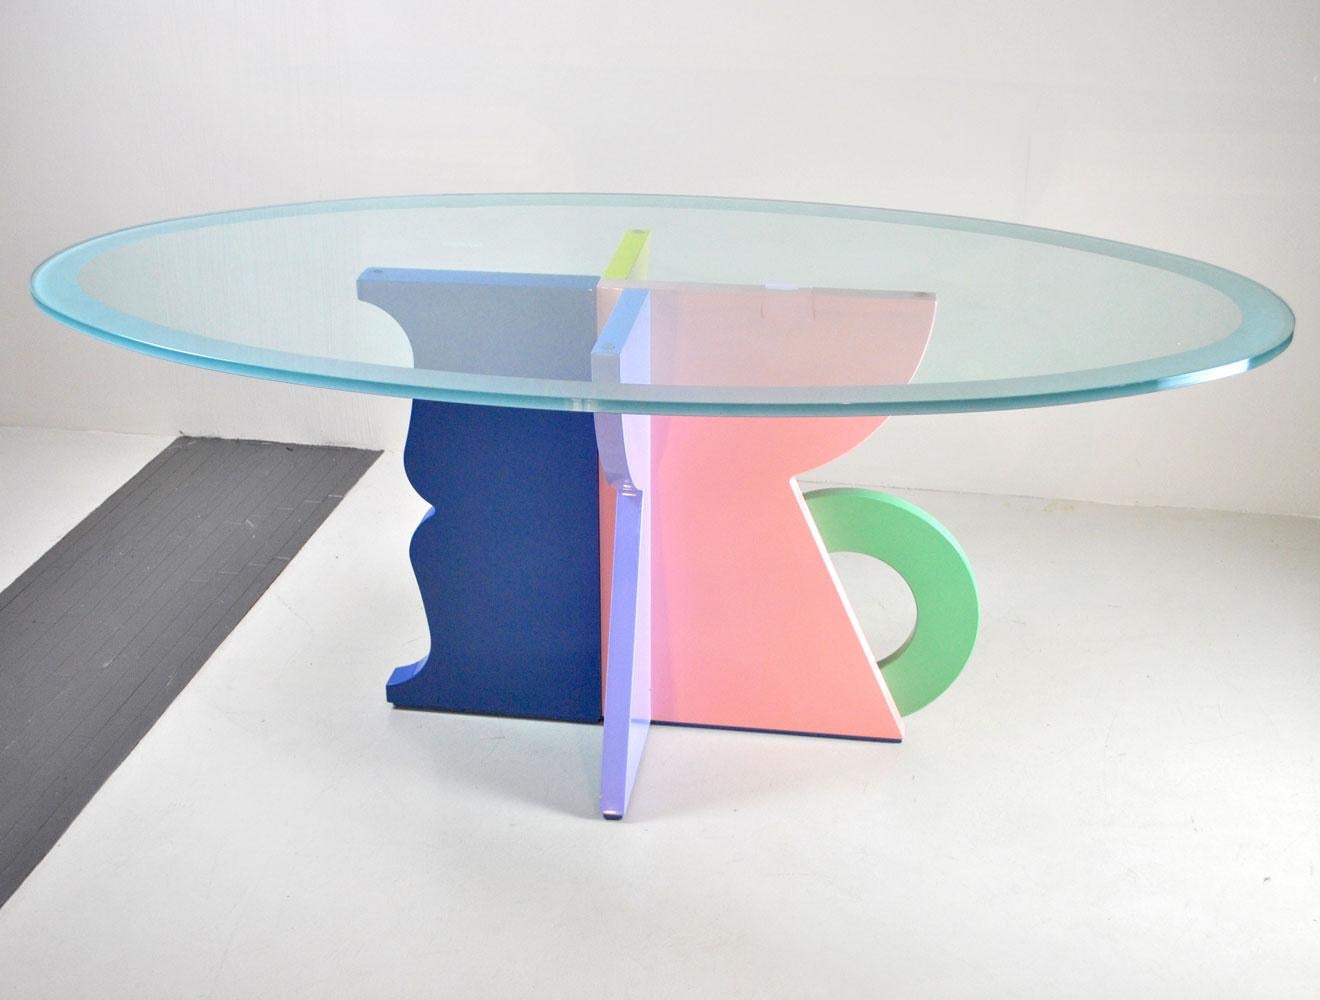 Mid-Century Modern Alessandro Mendini Italian Midcentury Table by Memphis from the 1980s